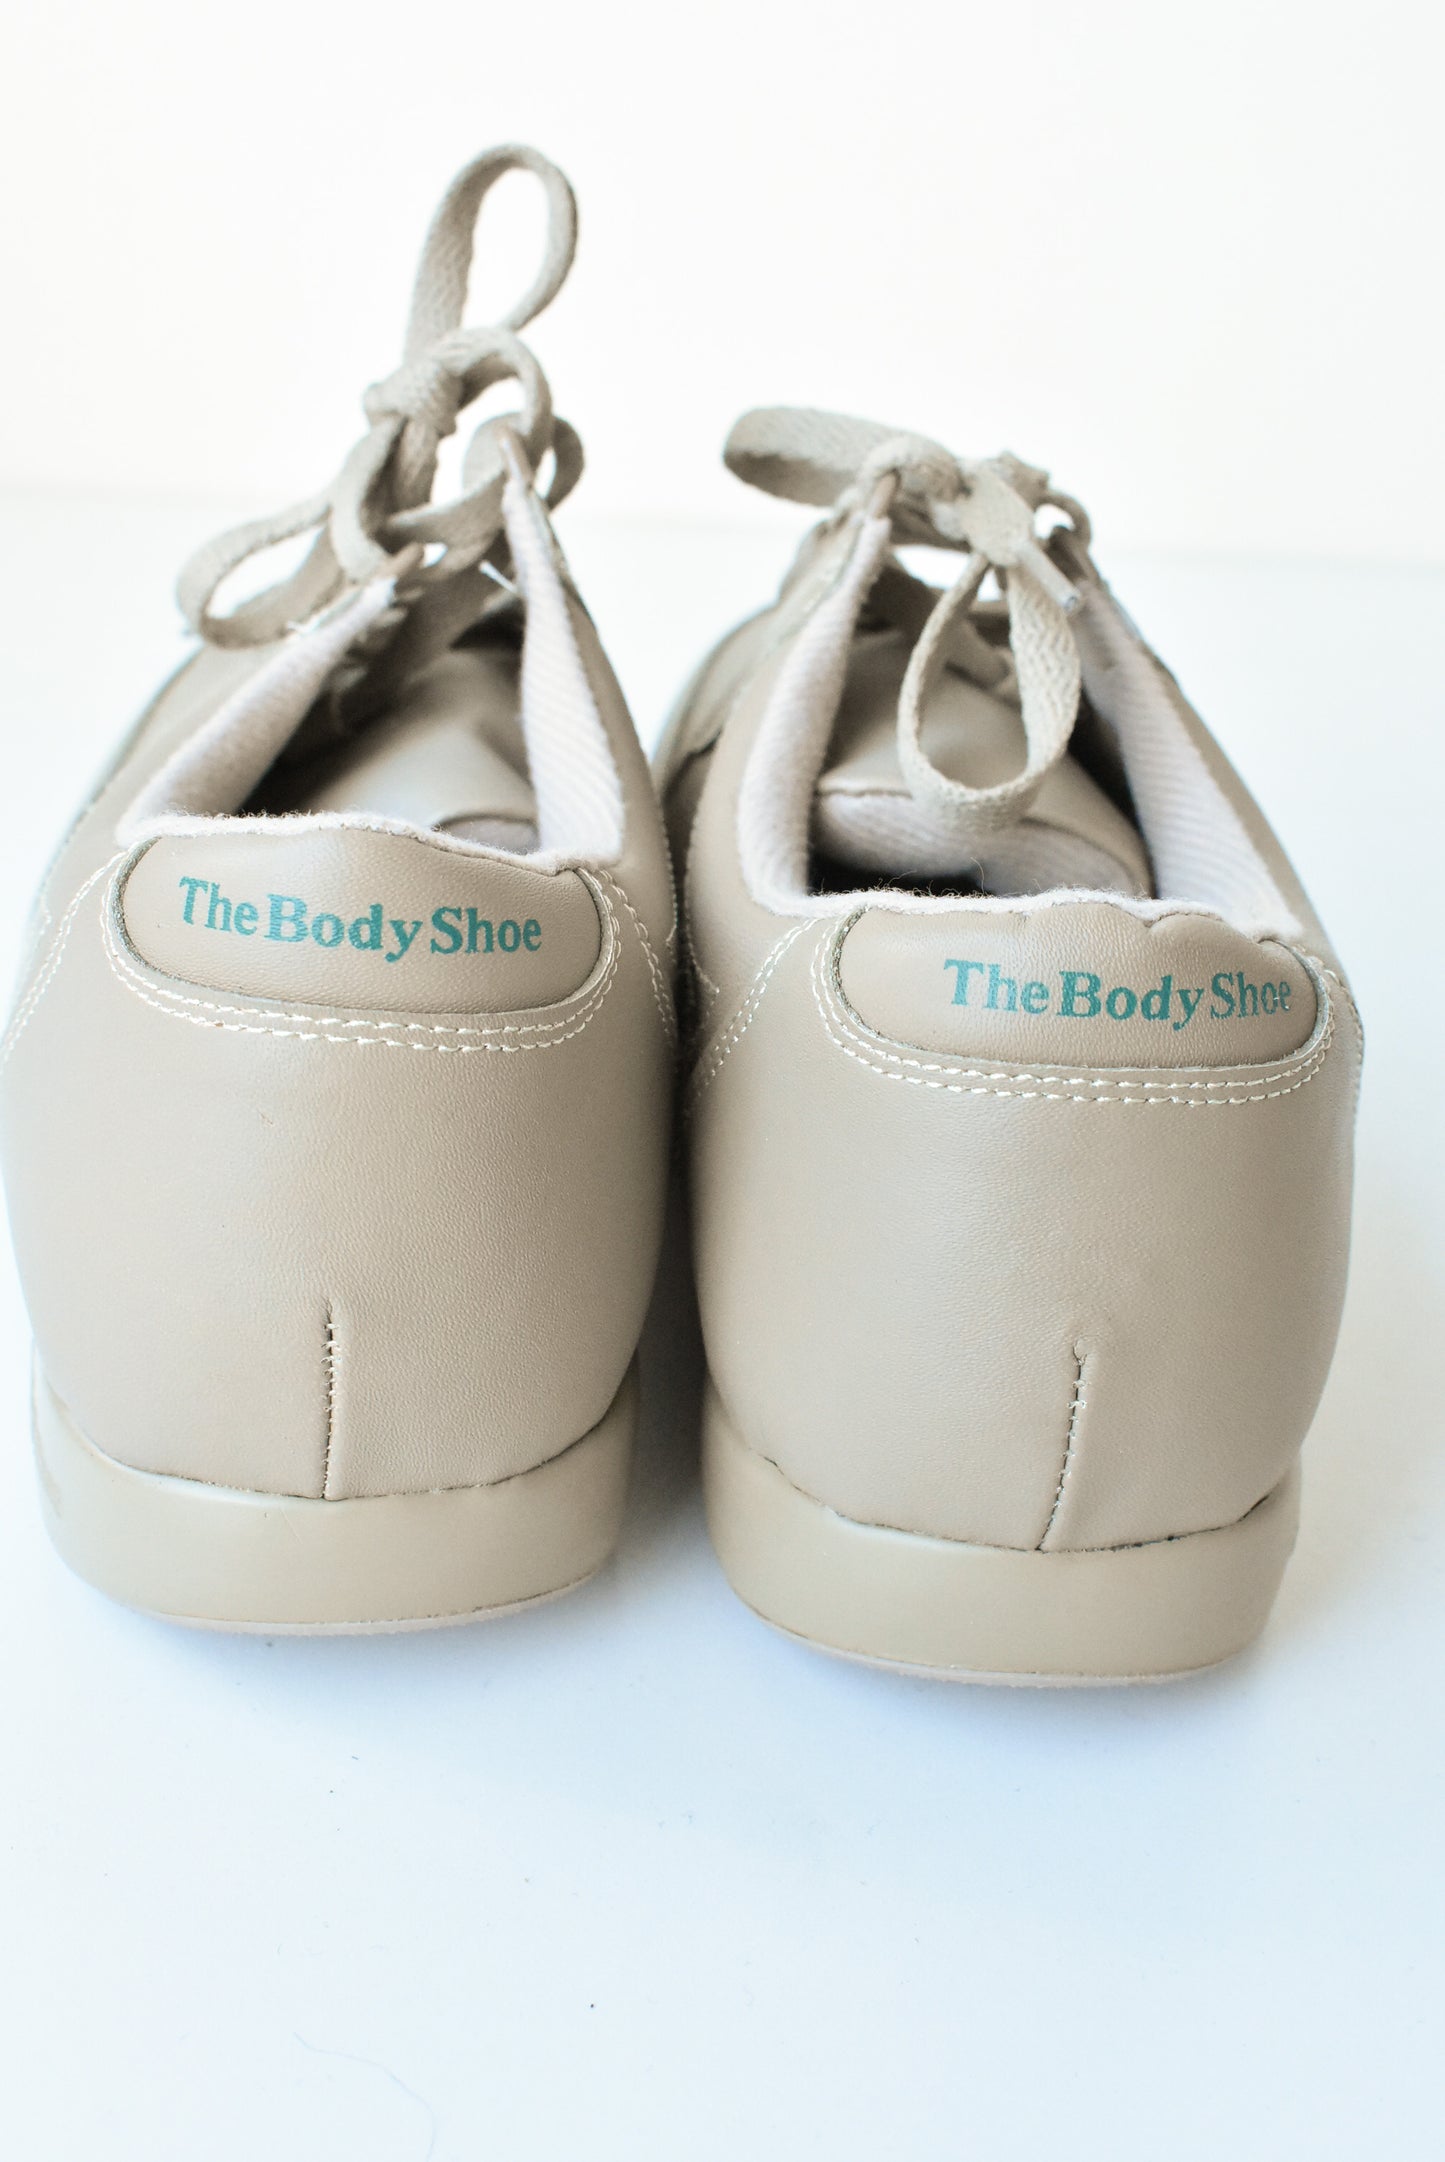 The Body Shoe, size 9 womens